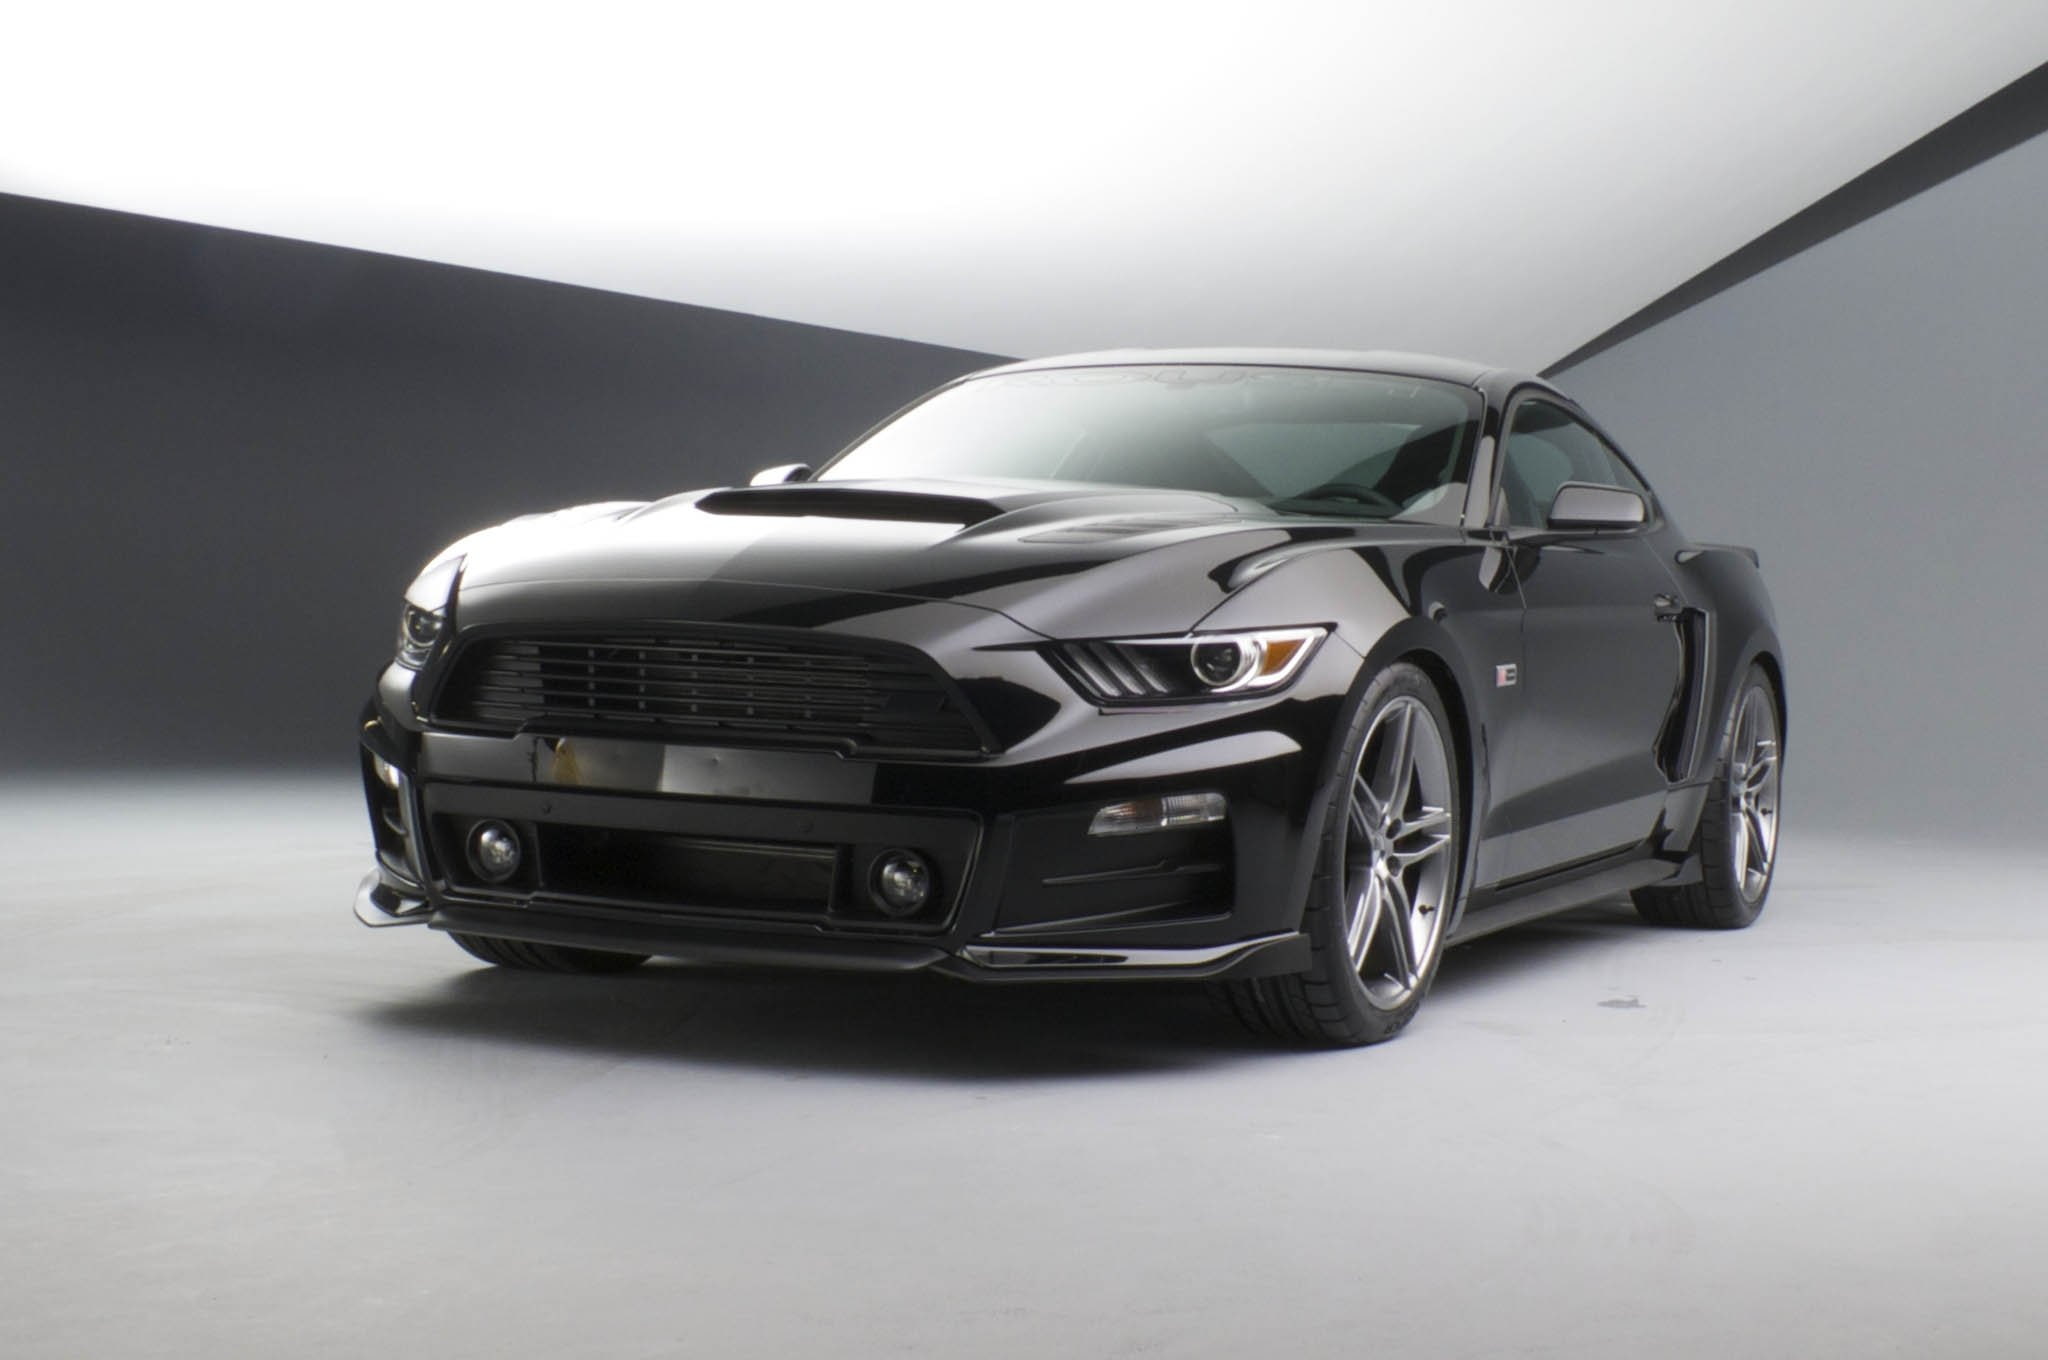 2015, ford, muscle, mustang, p550, r-s, roush